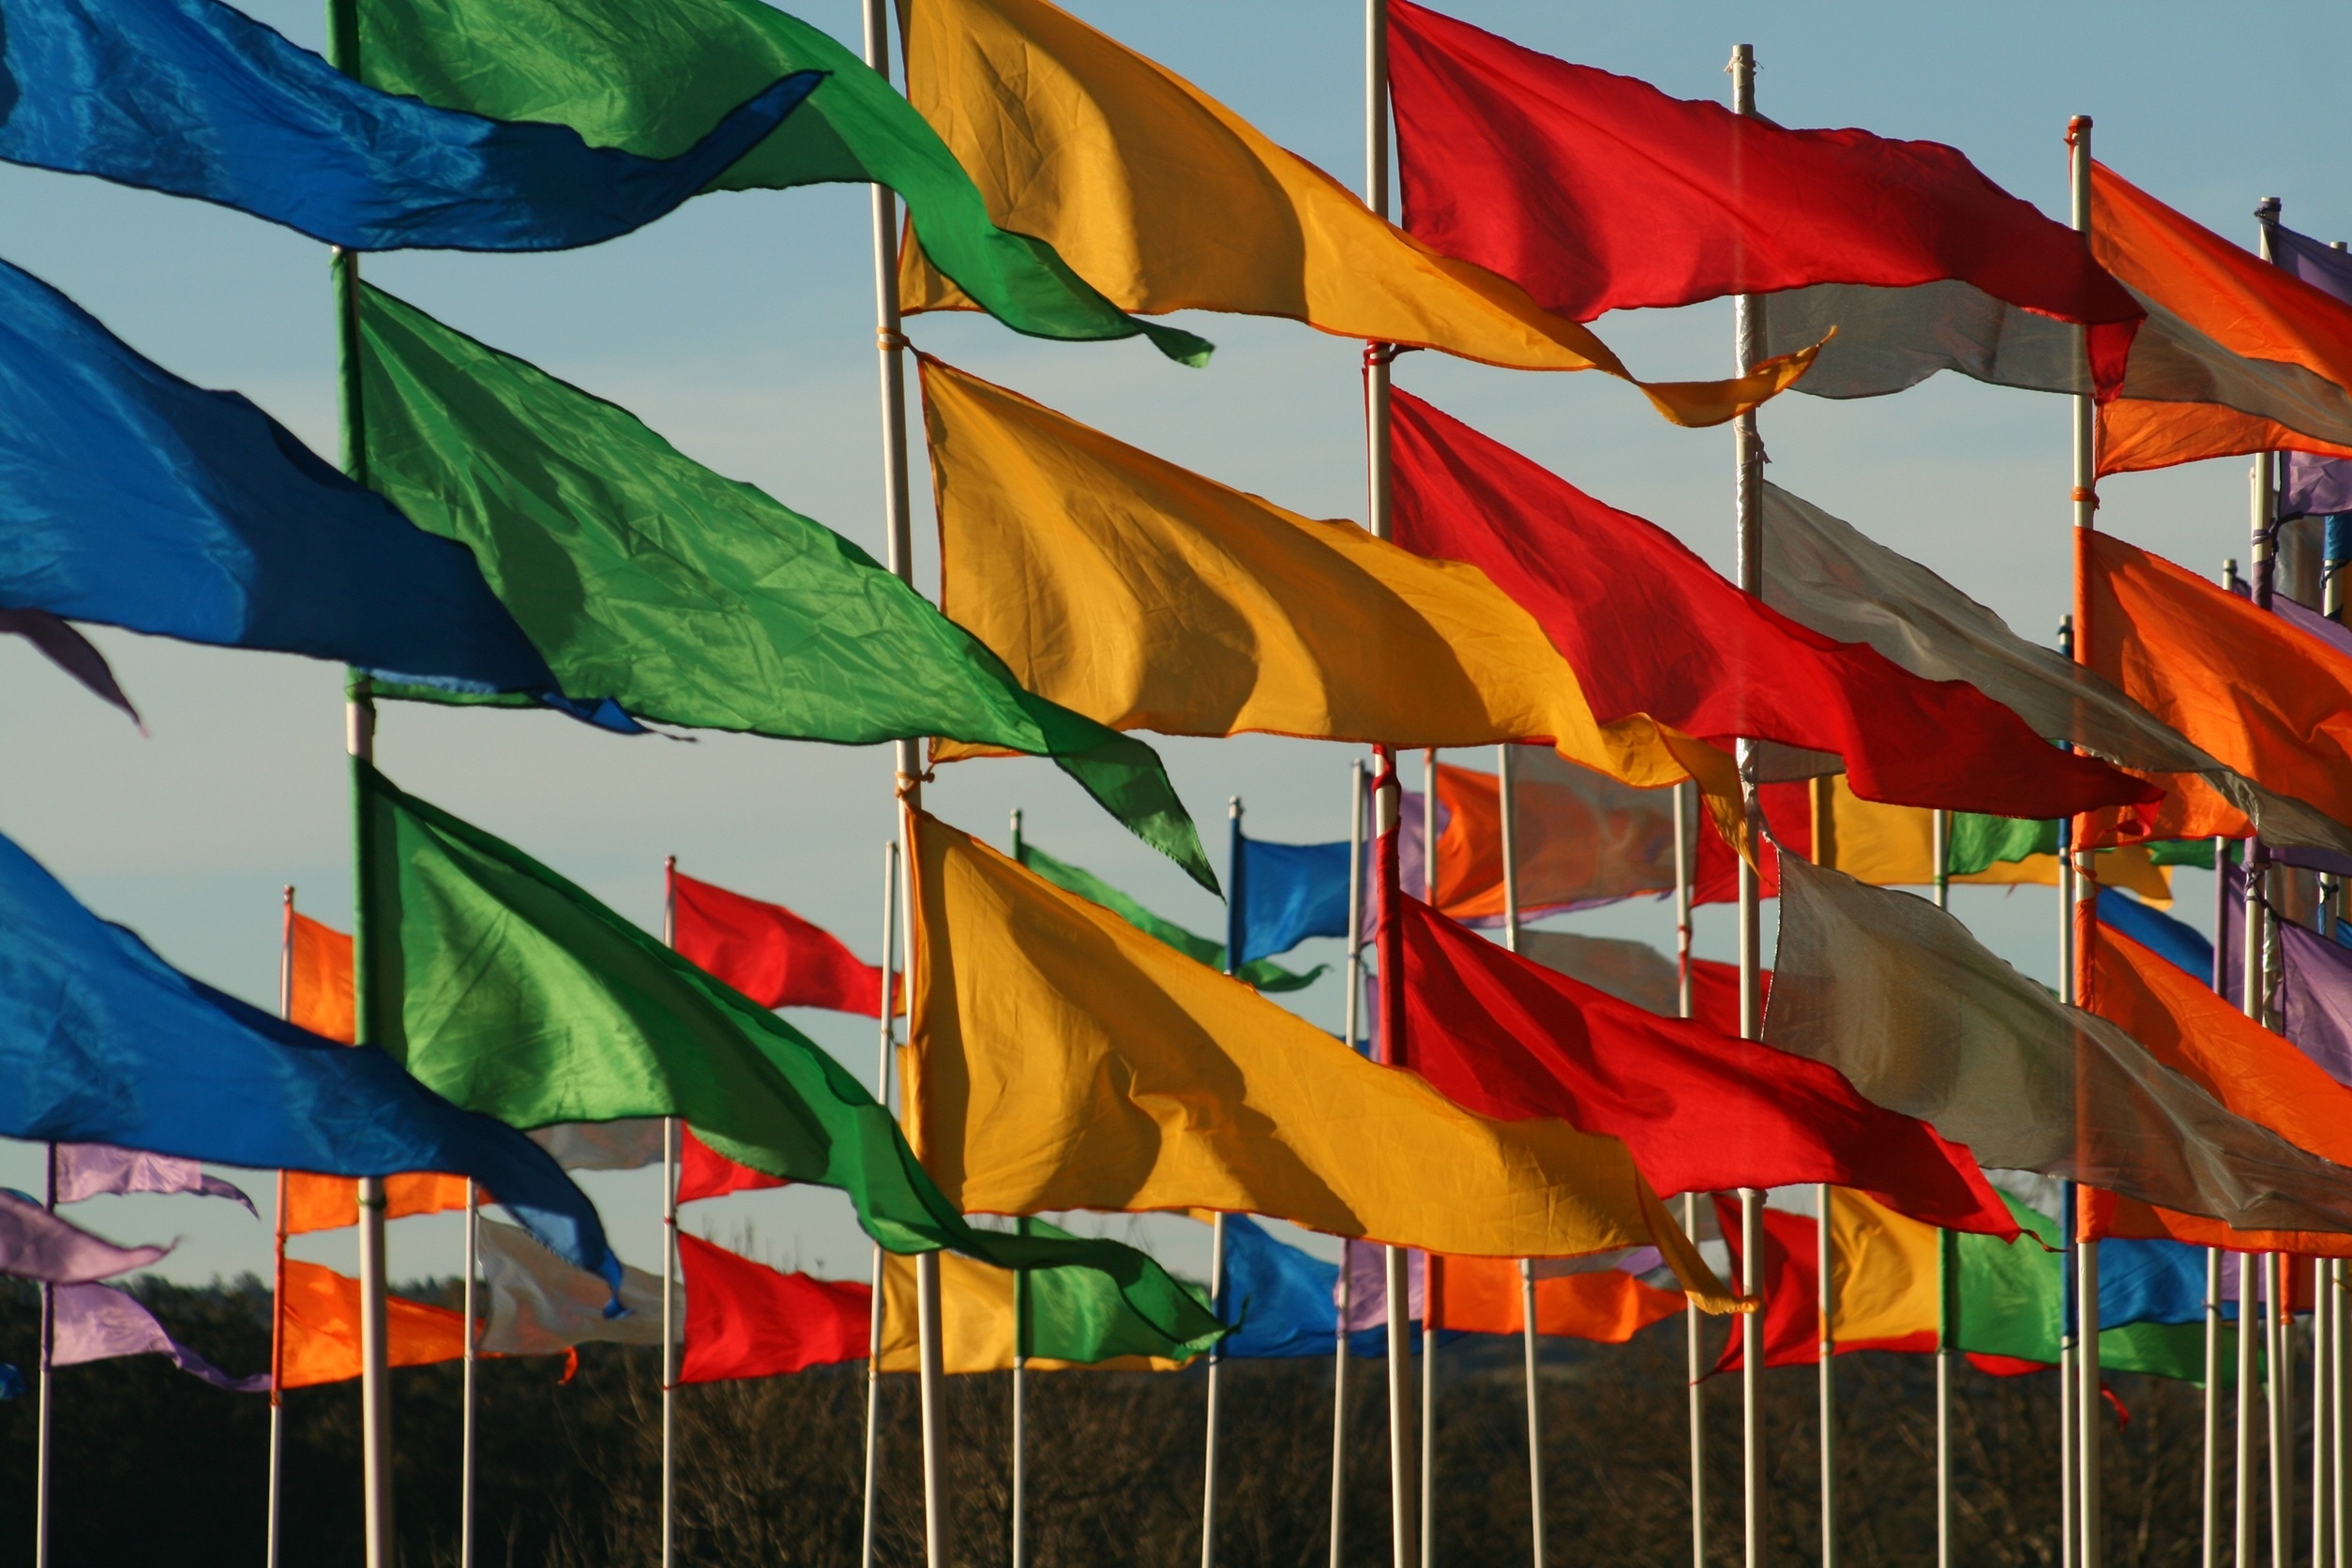 assorted flags under blue skies during daytime